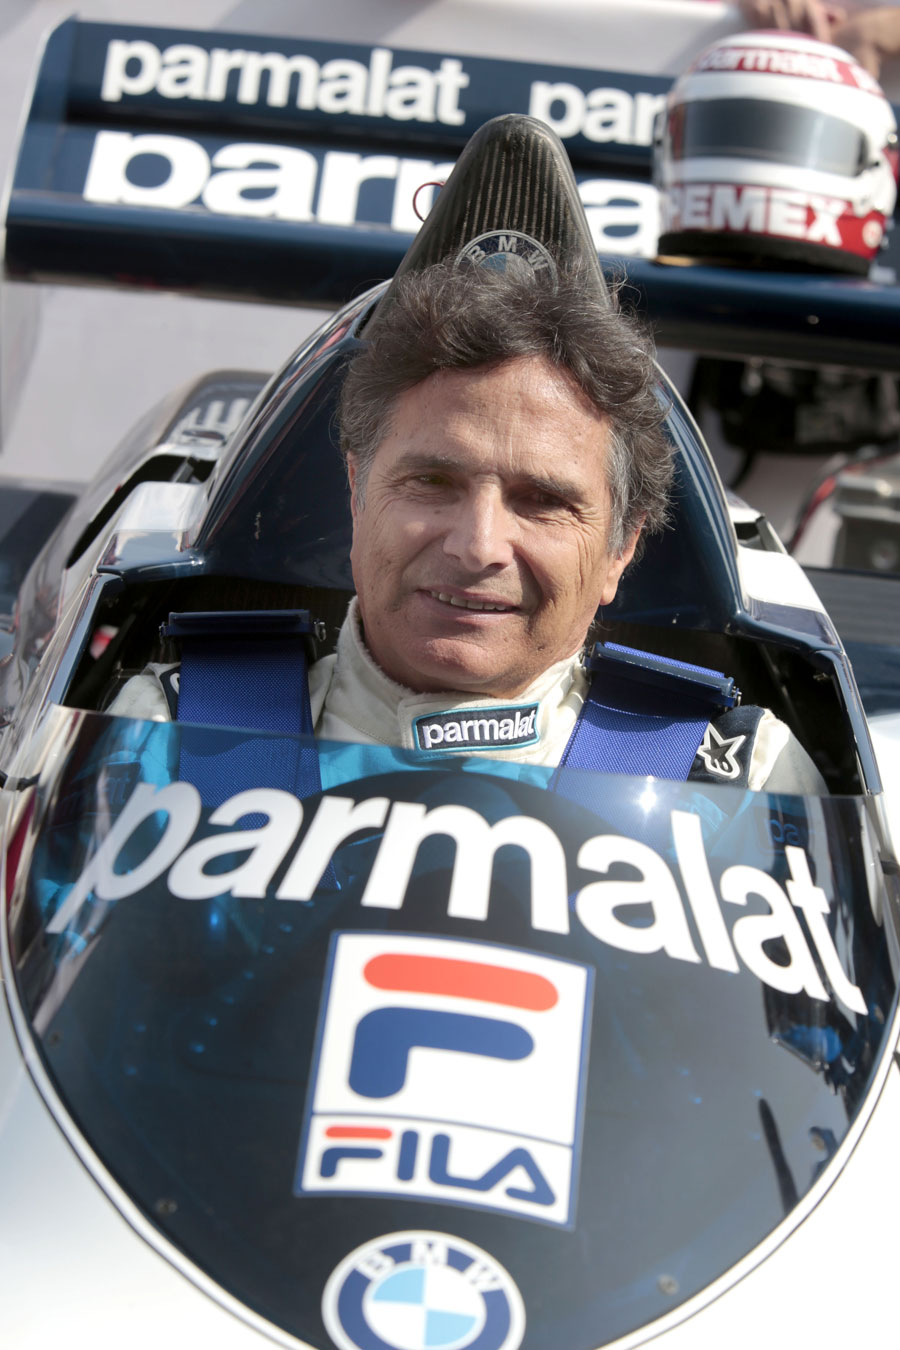 Nelson Piquet in the cockpit of the Brabham BT52